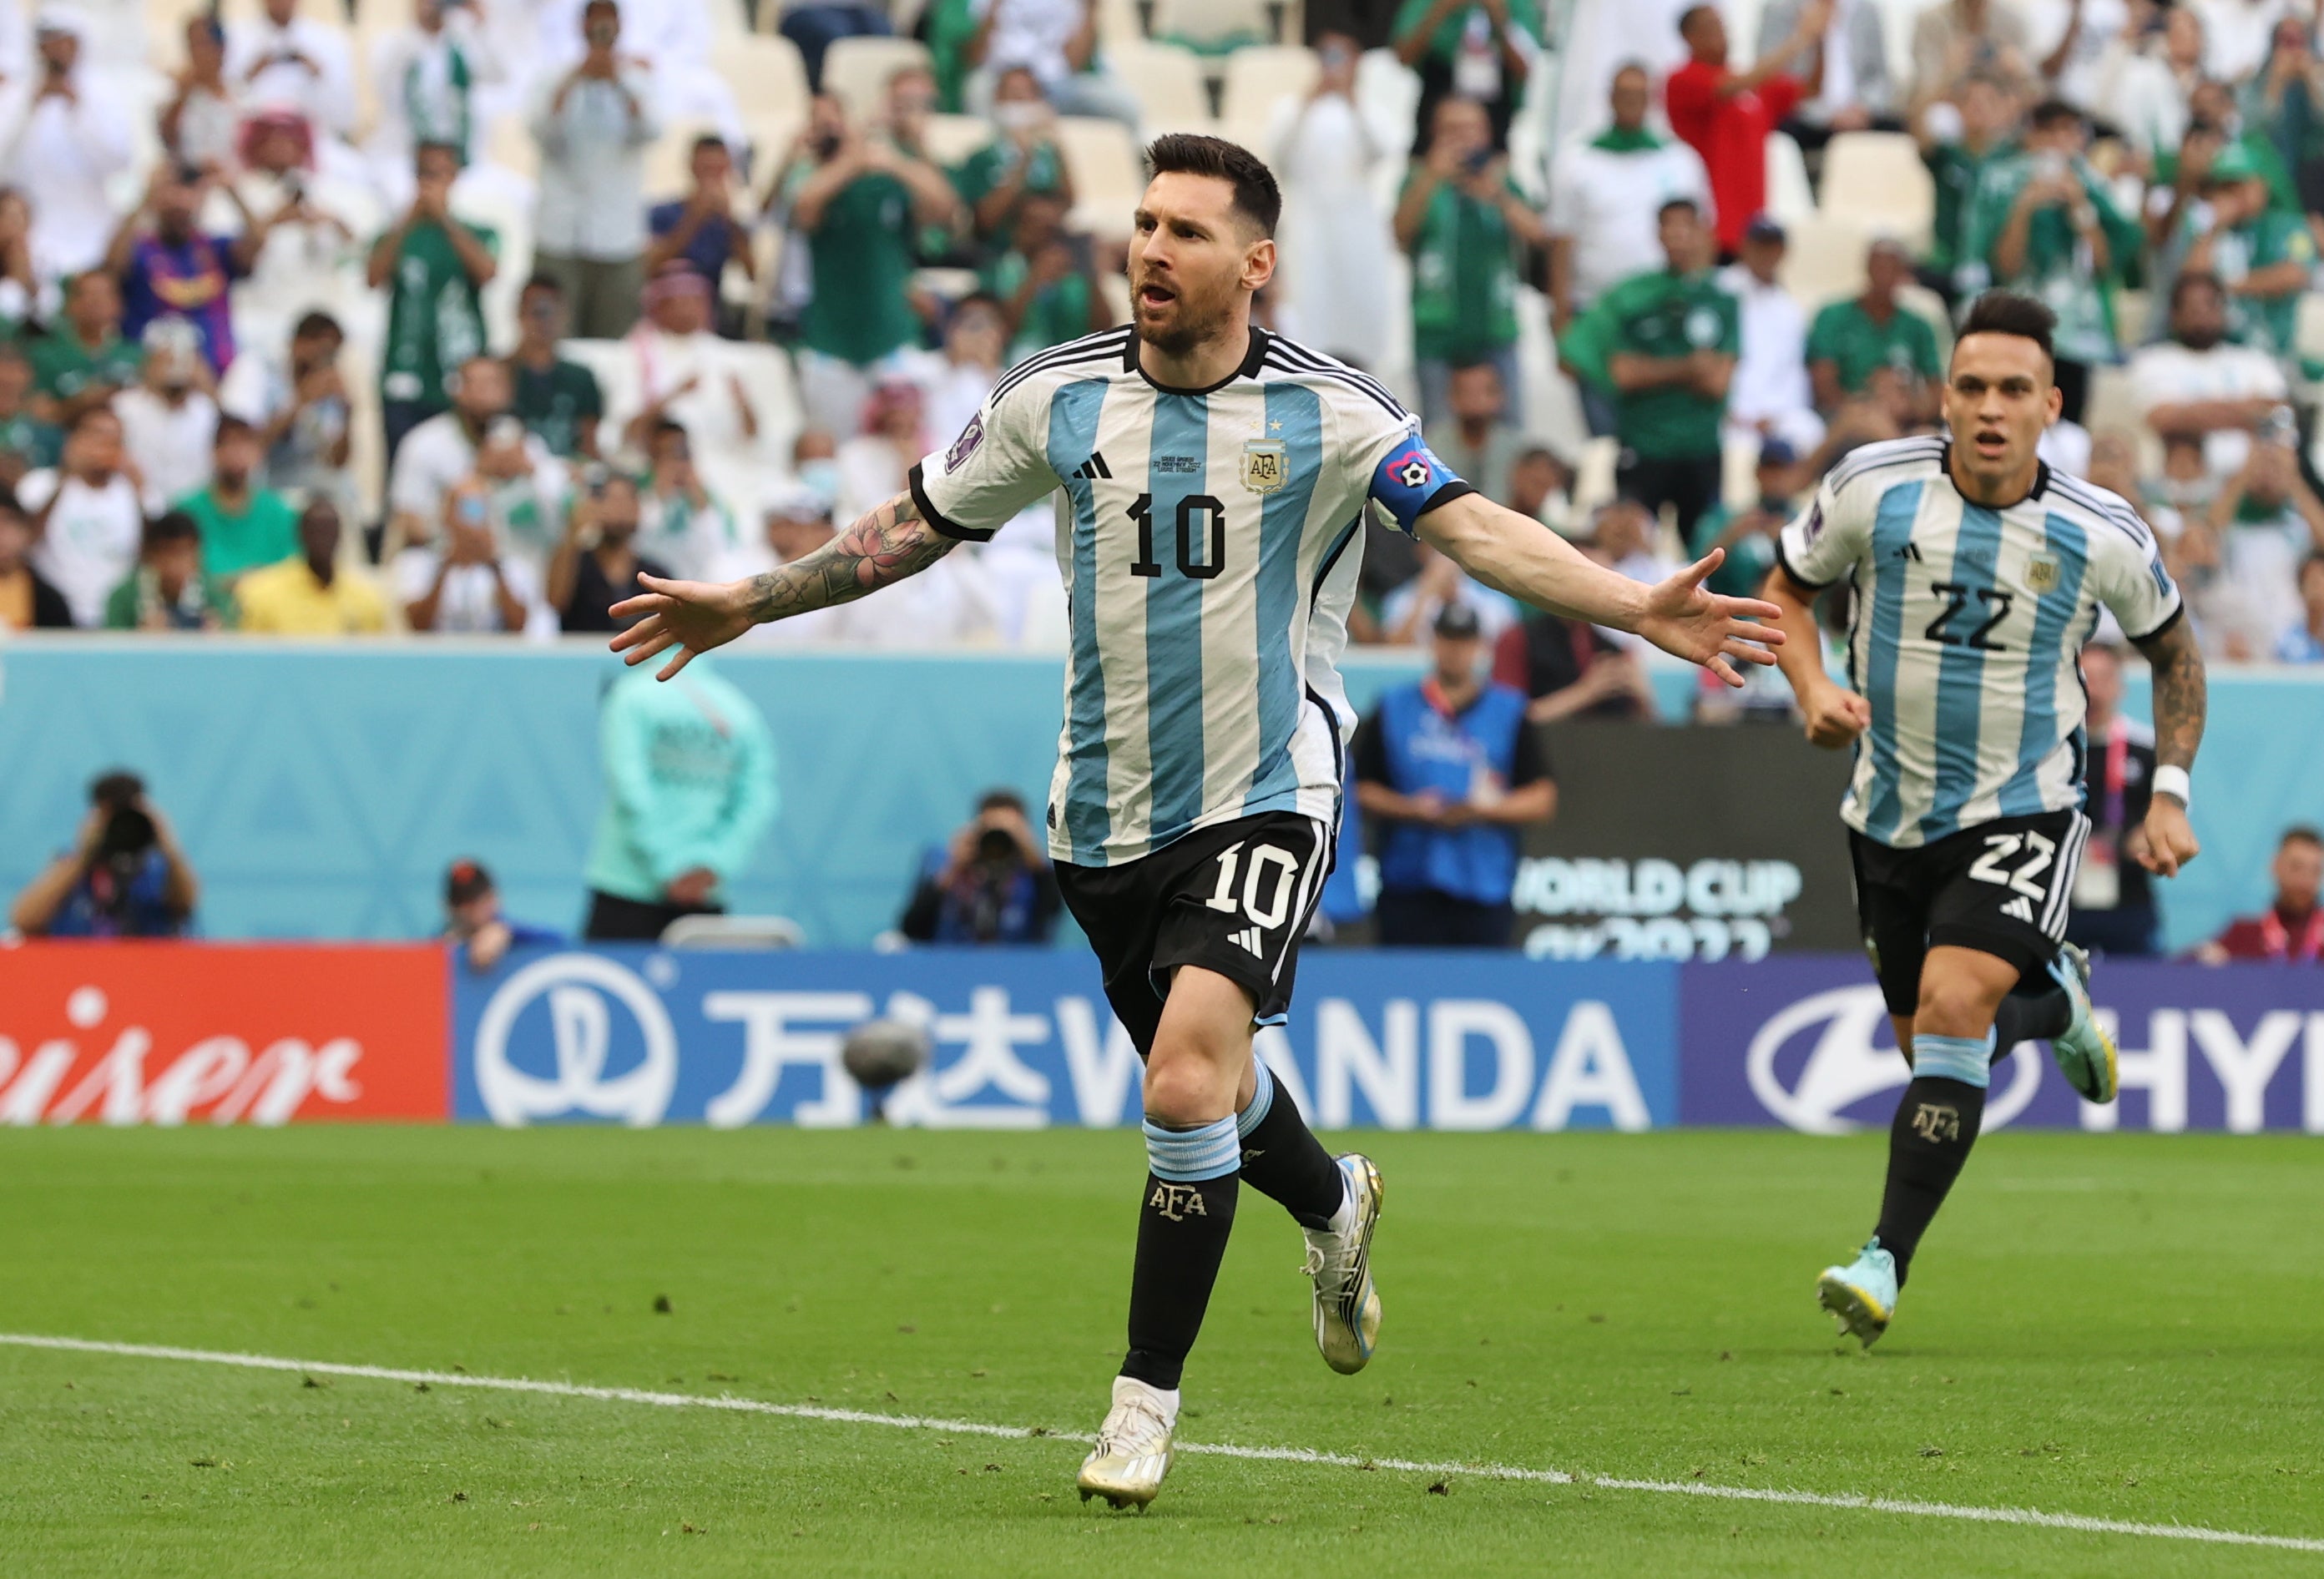 Lionel Messi celebrates after scoring a penalty to hand Argentina the lead